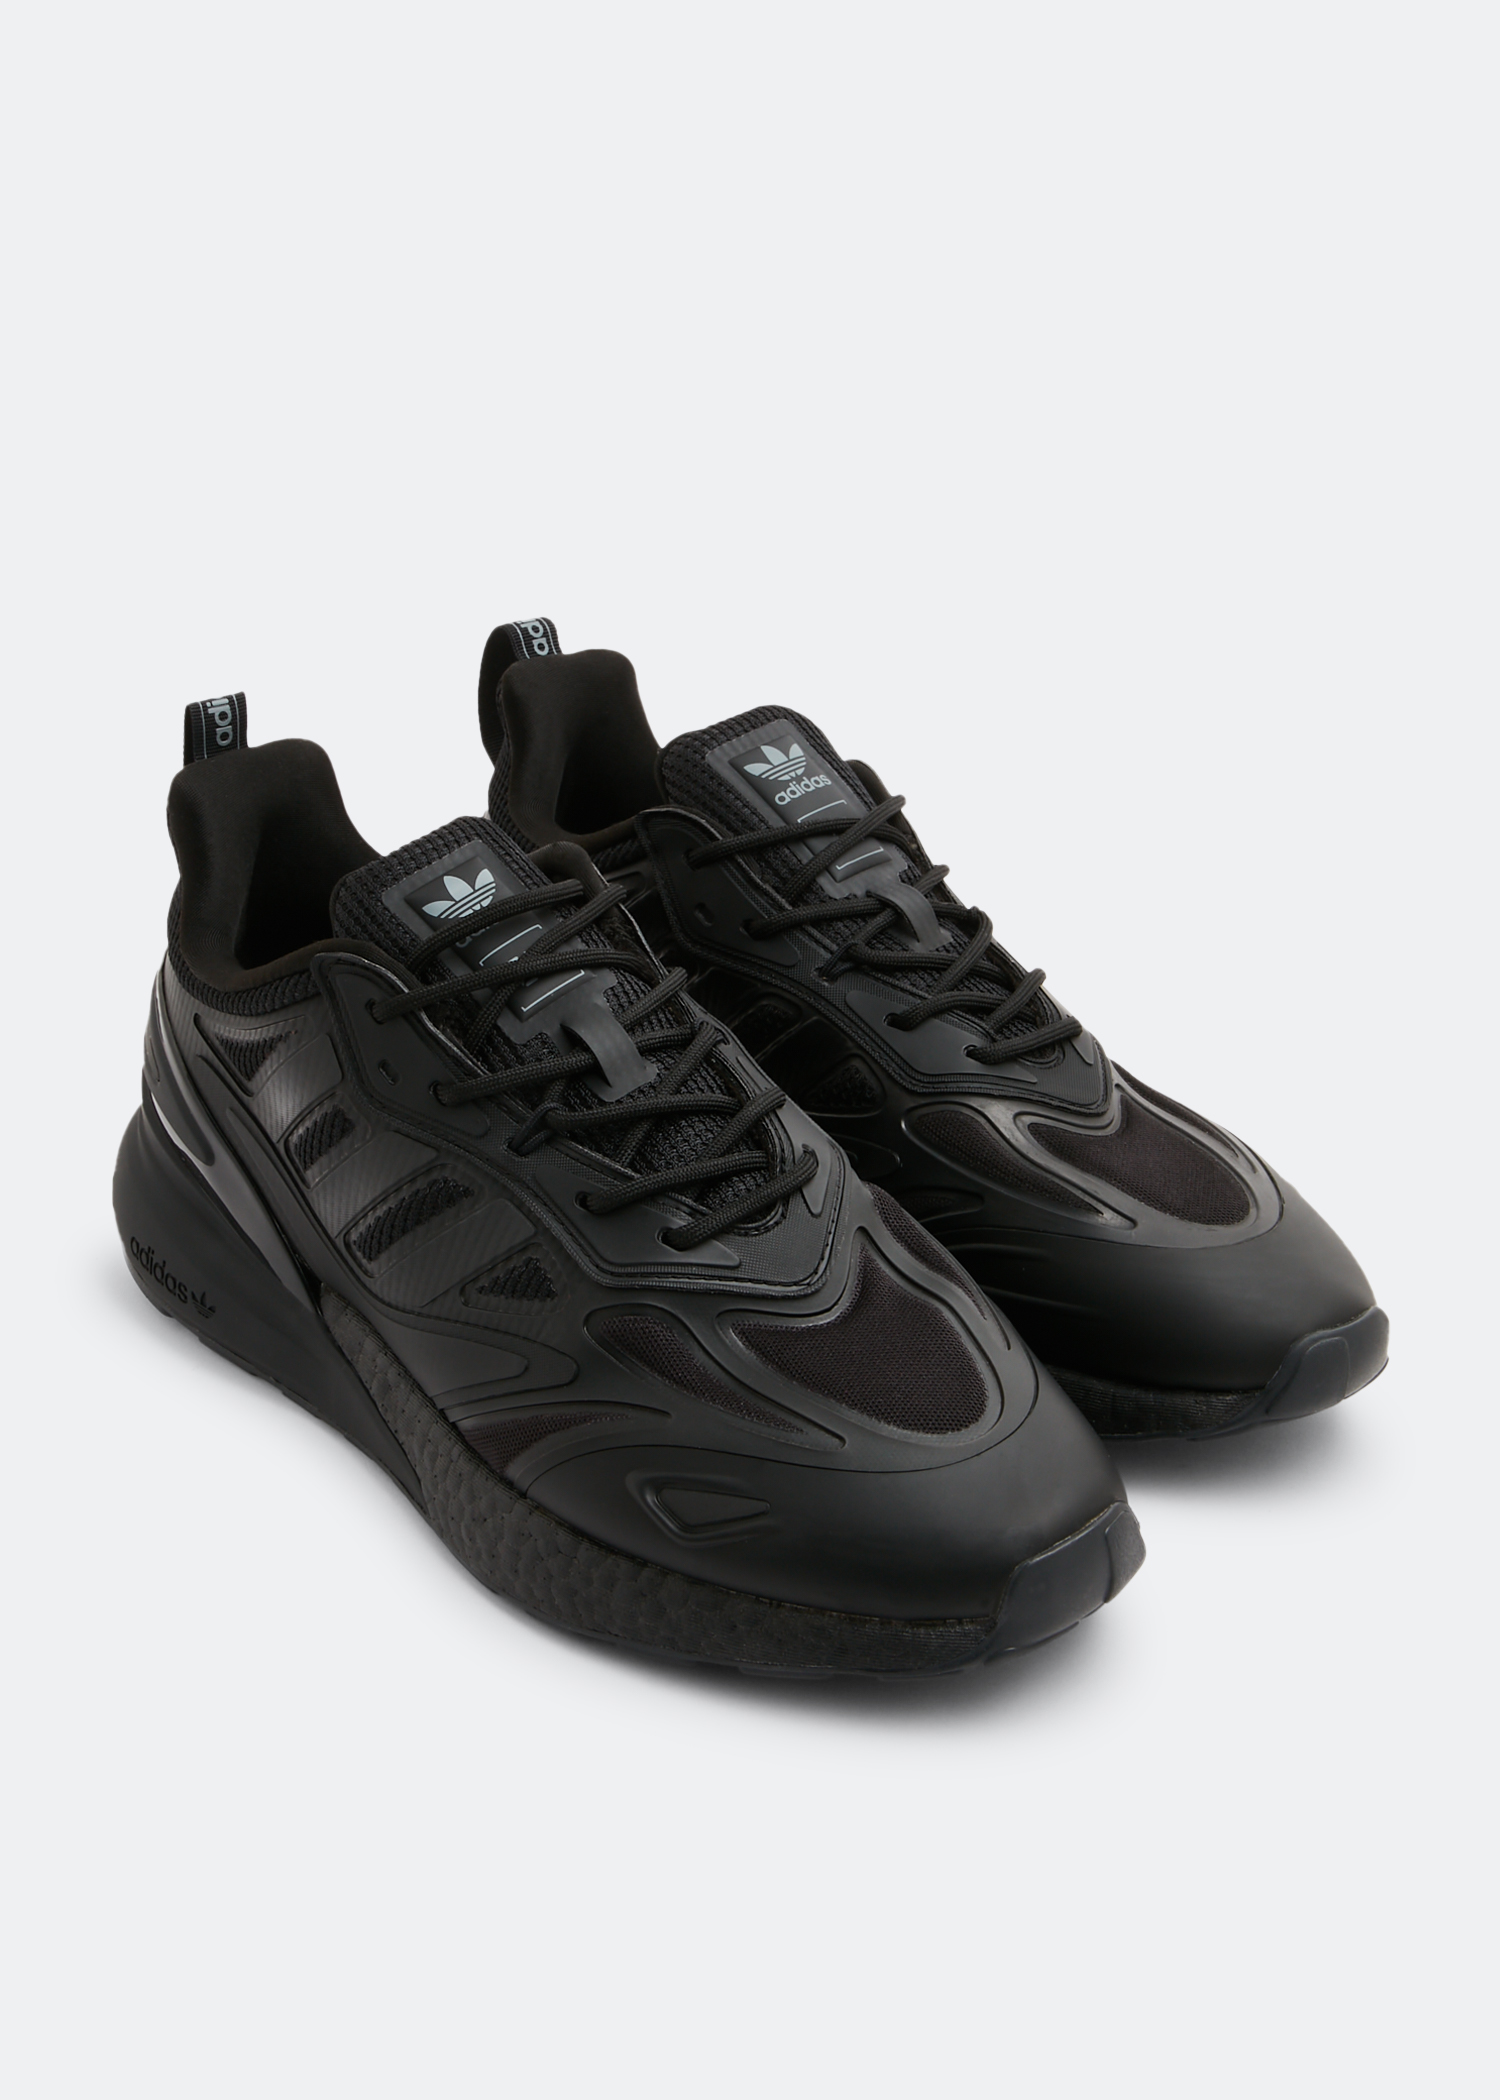 Adidas ZX 2K Boost 2.0 sneakers for Men - Black in KSA | Level Shoes